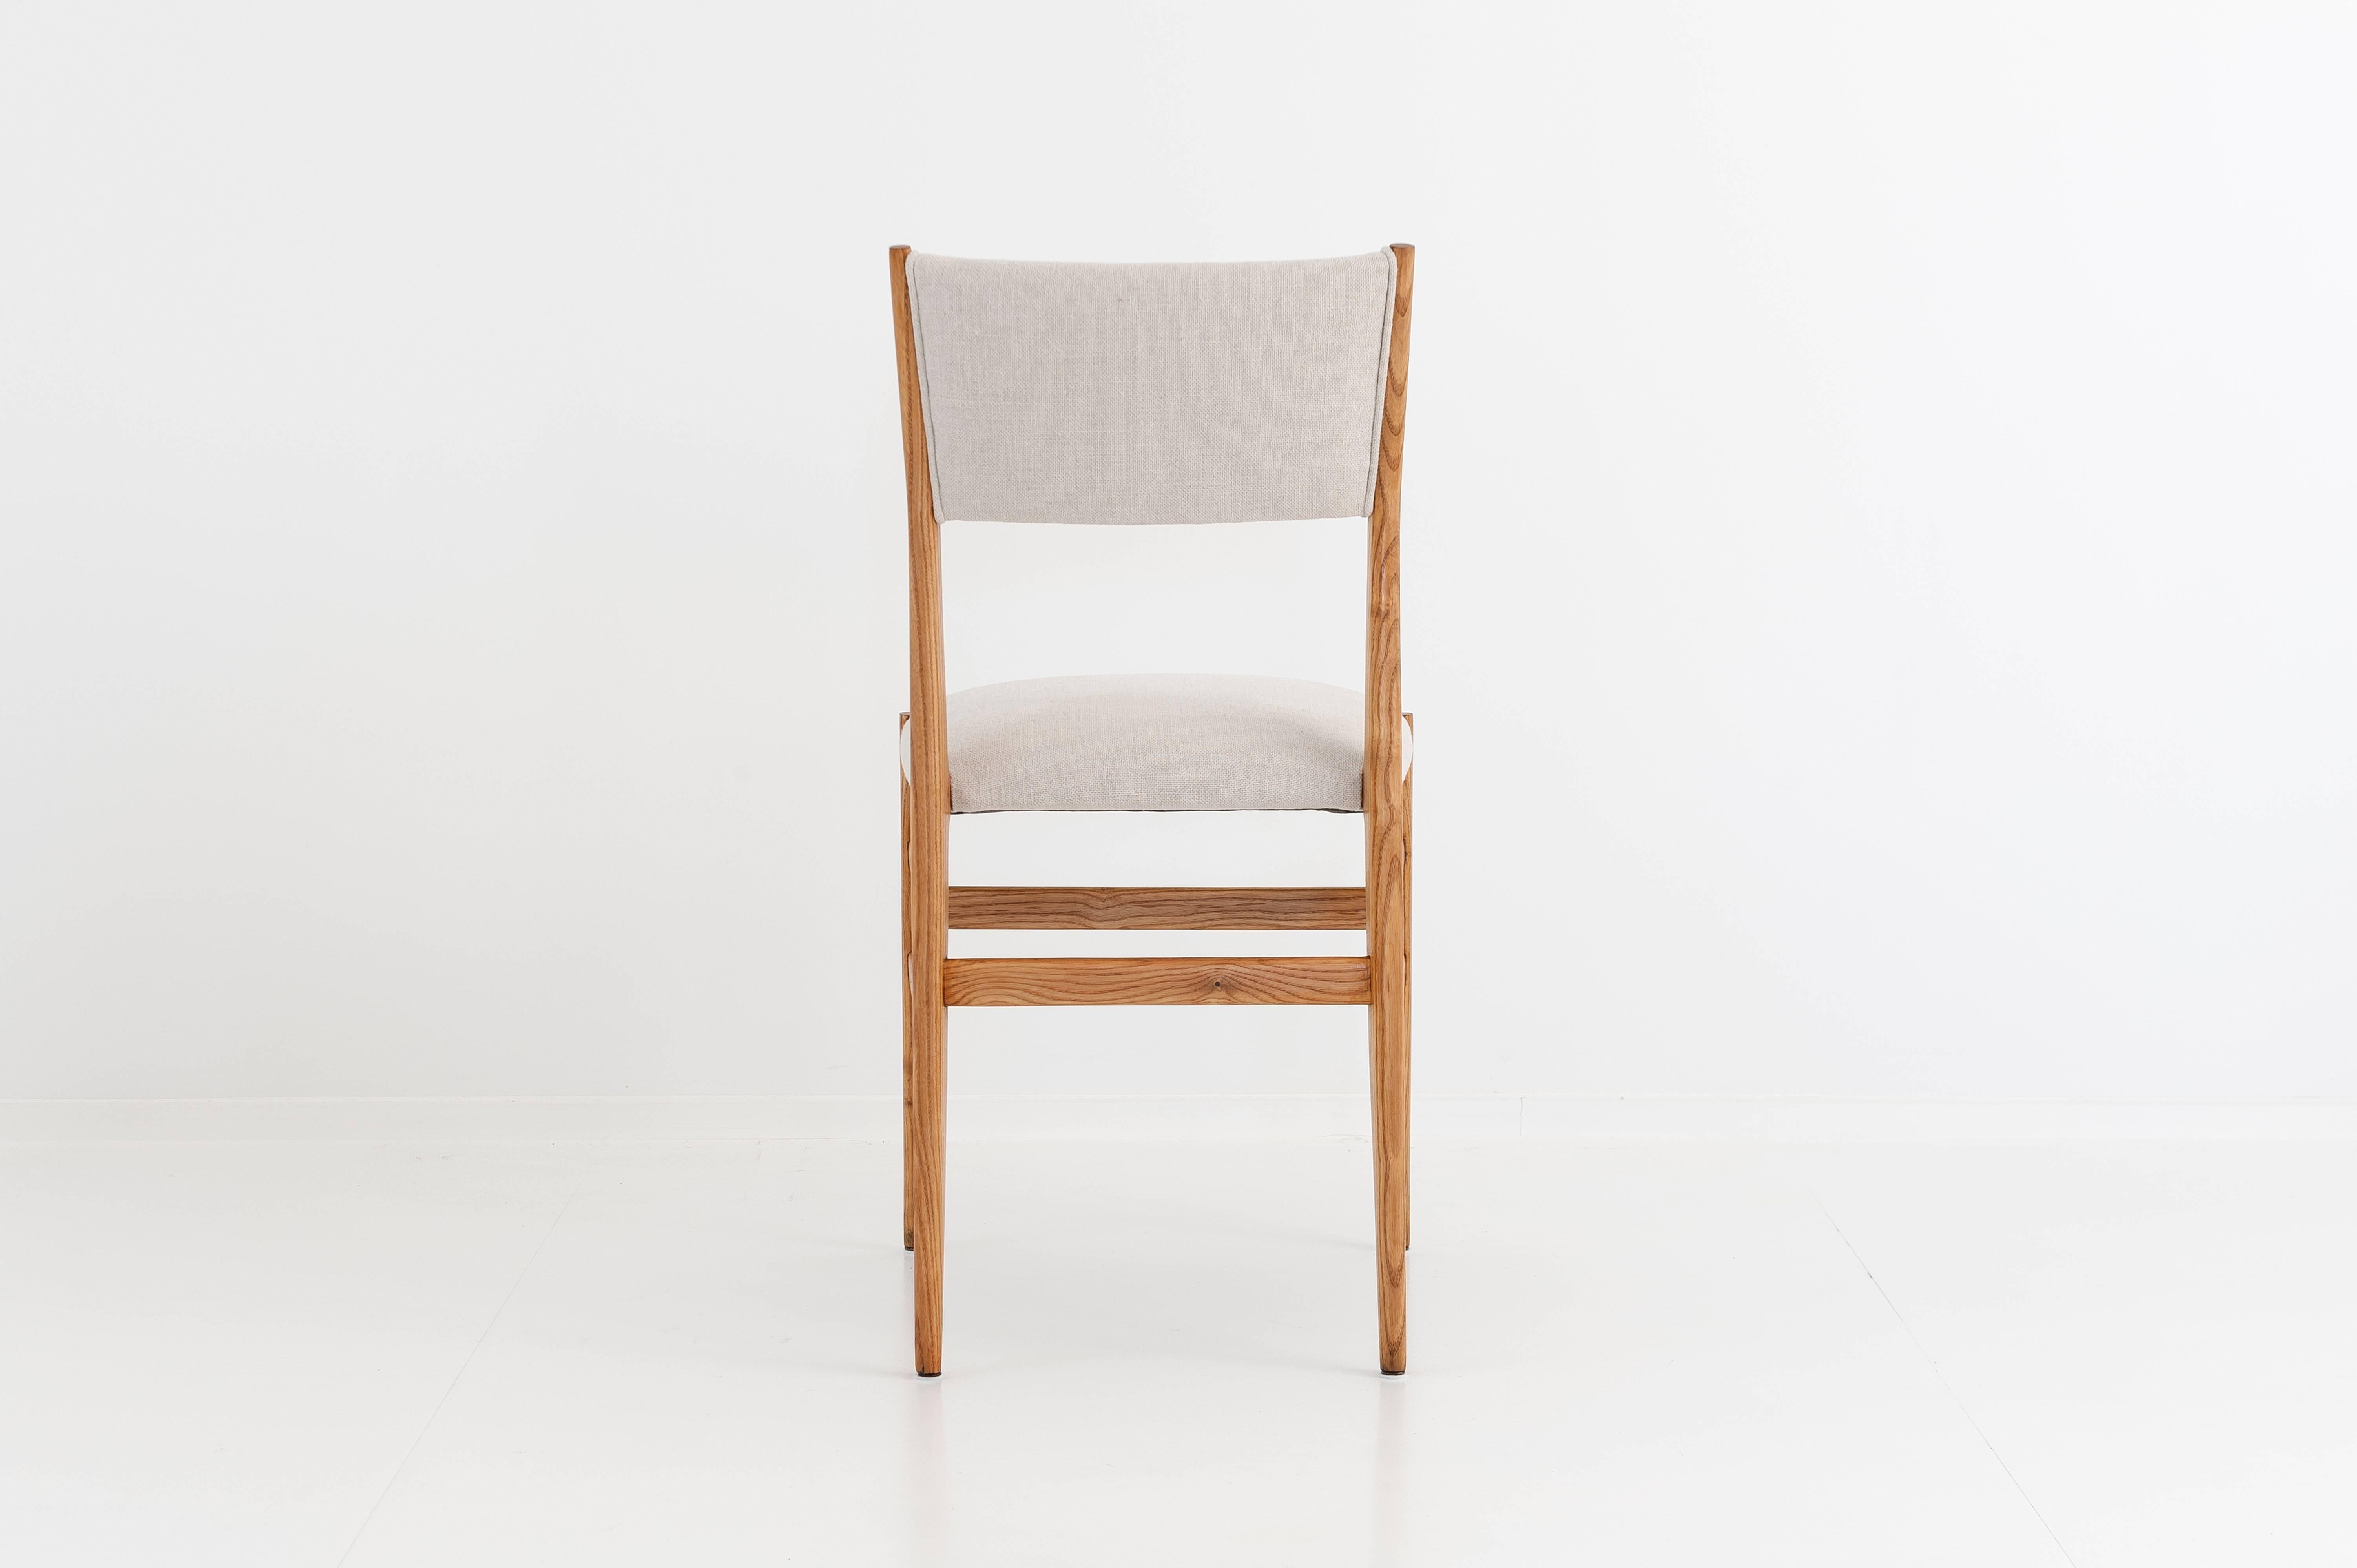 Polished 12 Vintage Italian Leggere Chairs in Ashtree Wood by Gio Ponti, circa 1954 For Sale